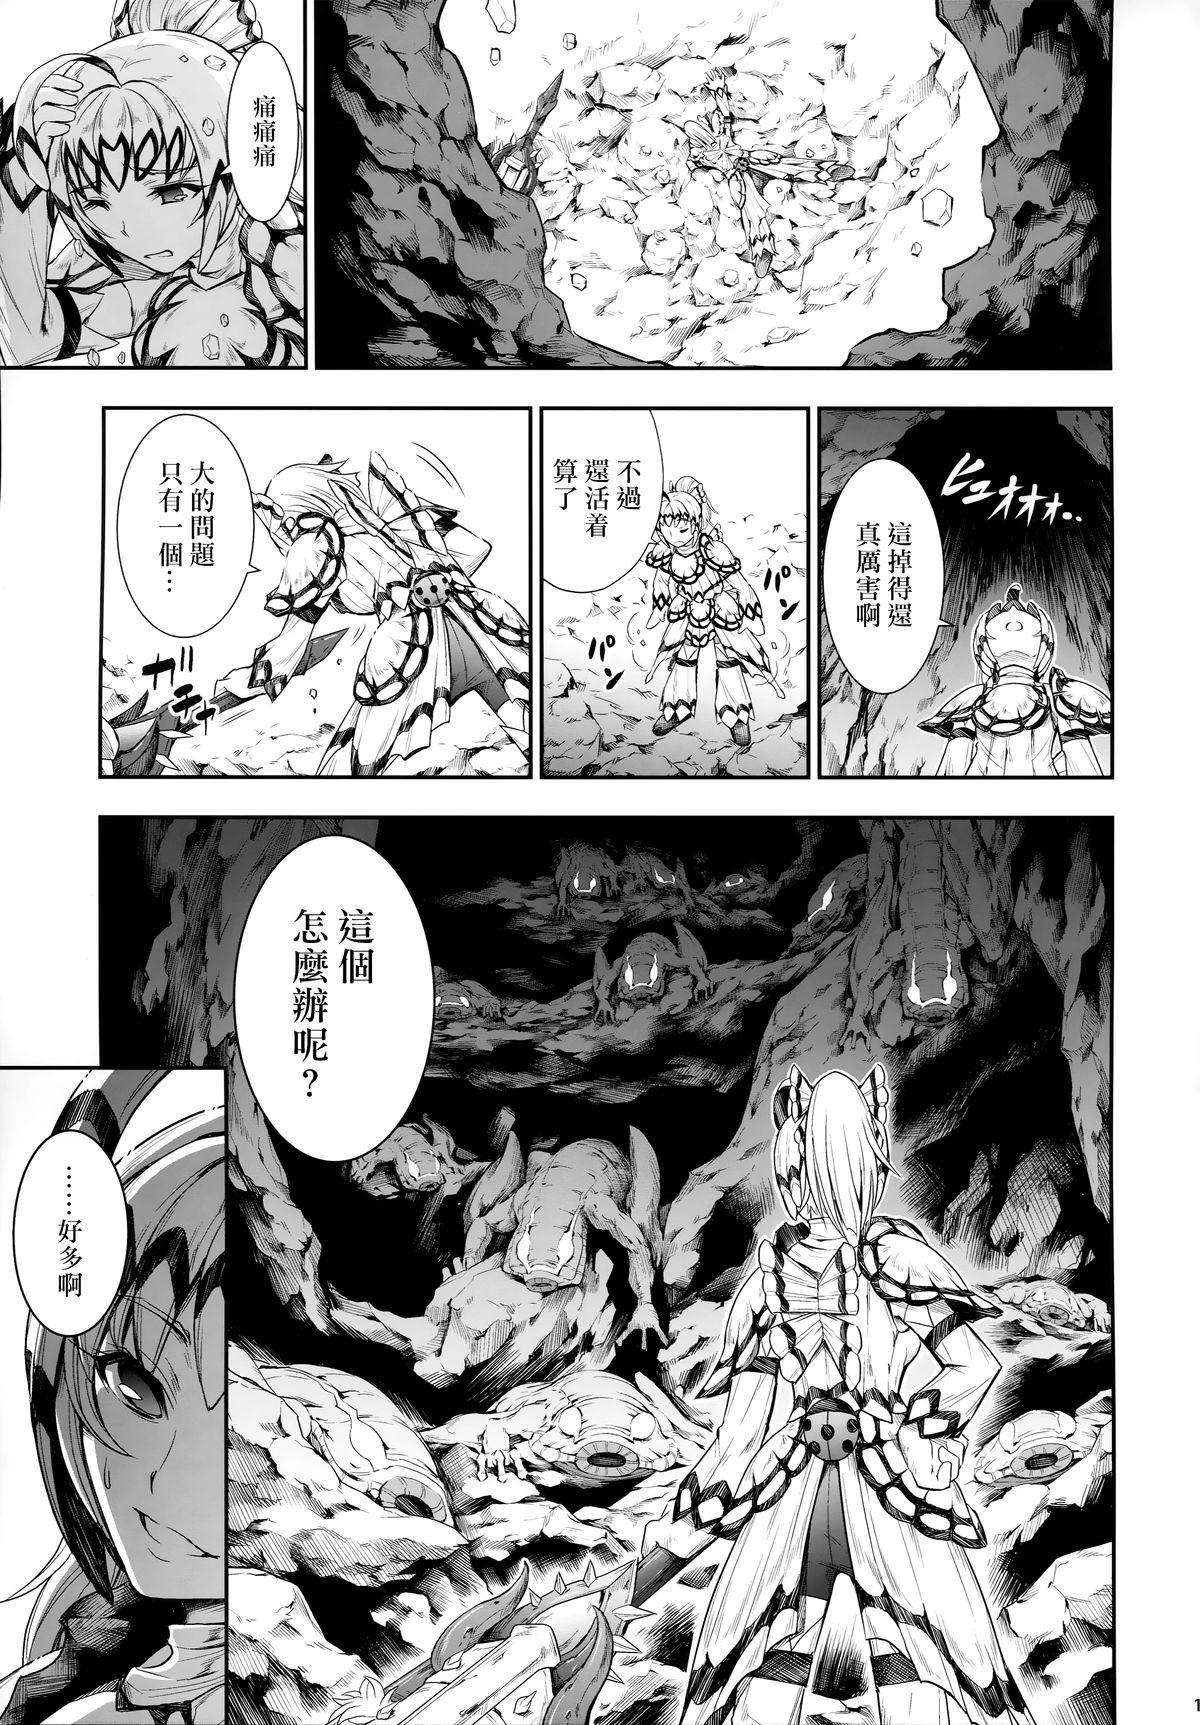 Sologirl Solo Hunter no Seitai 4 The Fifth Part - Monster hunter Best - Page 12